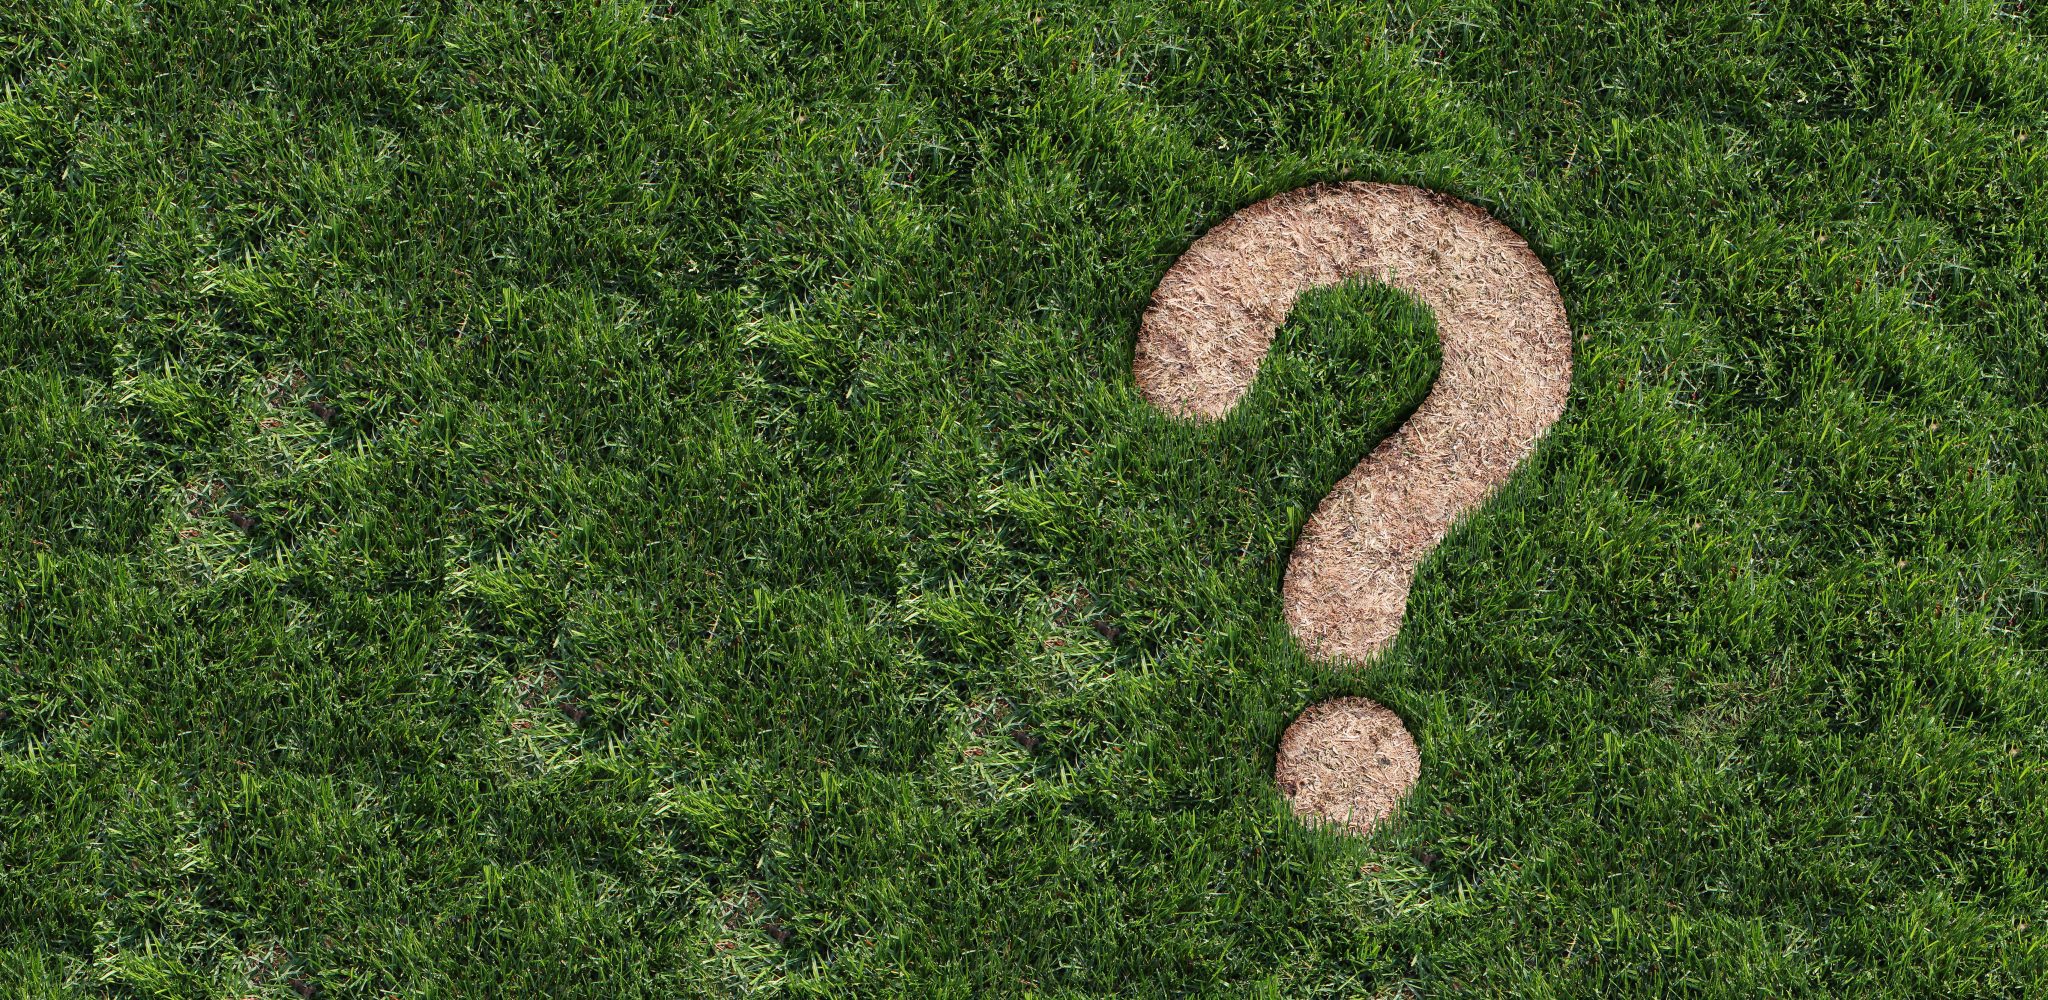 Birdseye view of a patch of grass containing a brown spot in the shape of a question mark